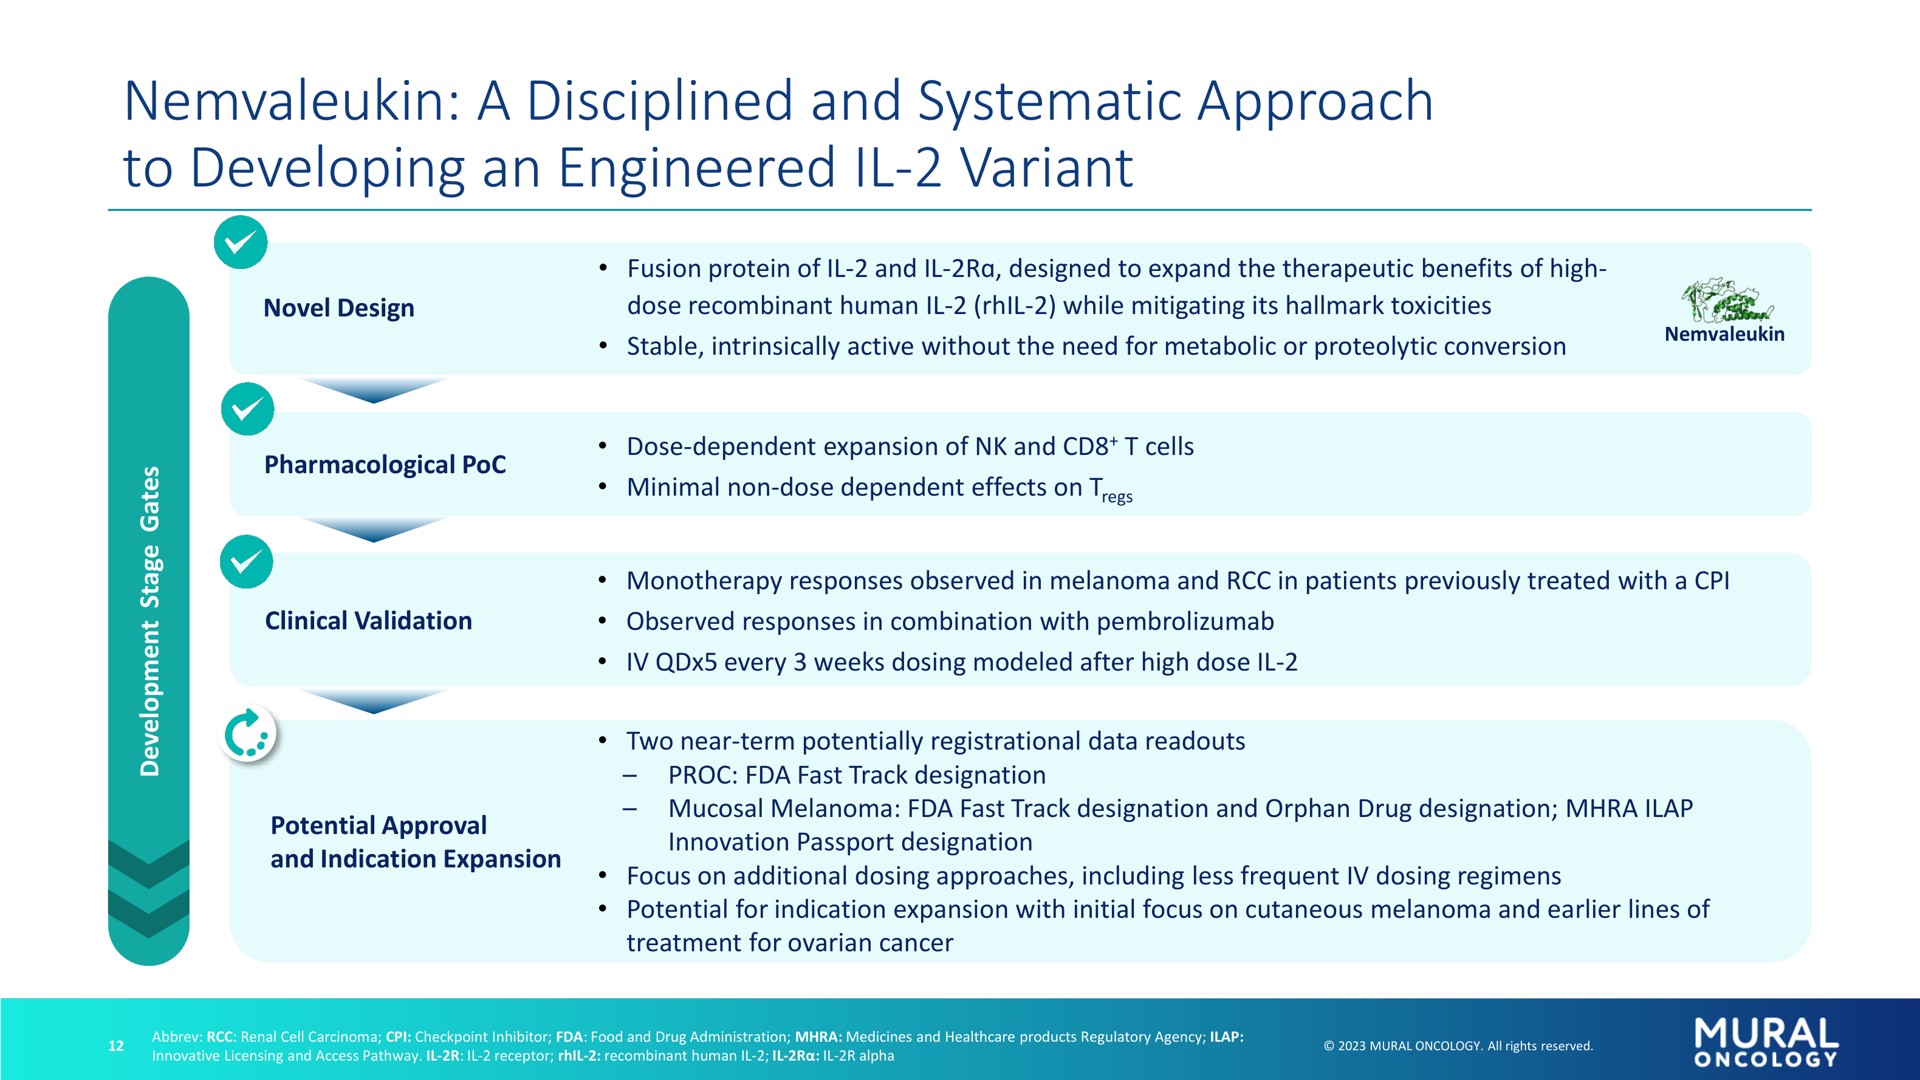 a disciplined and systematic approach to developing an engineered variant | Alkermes